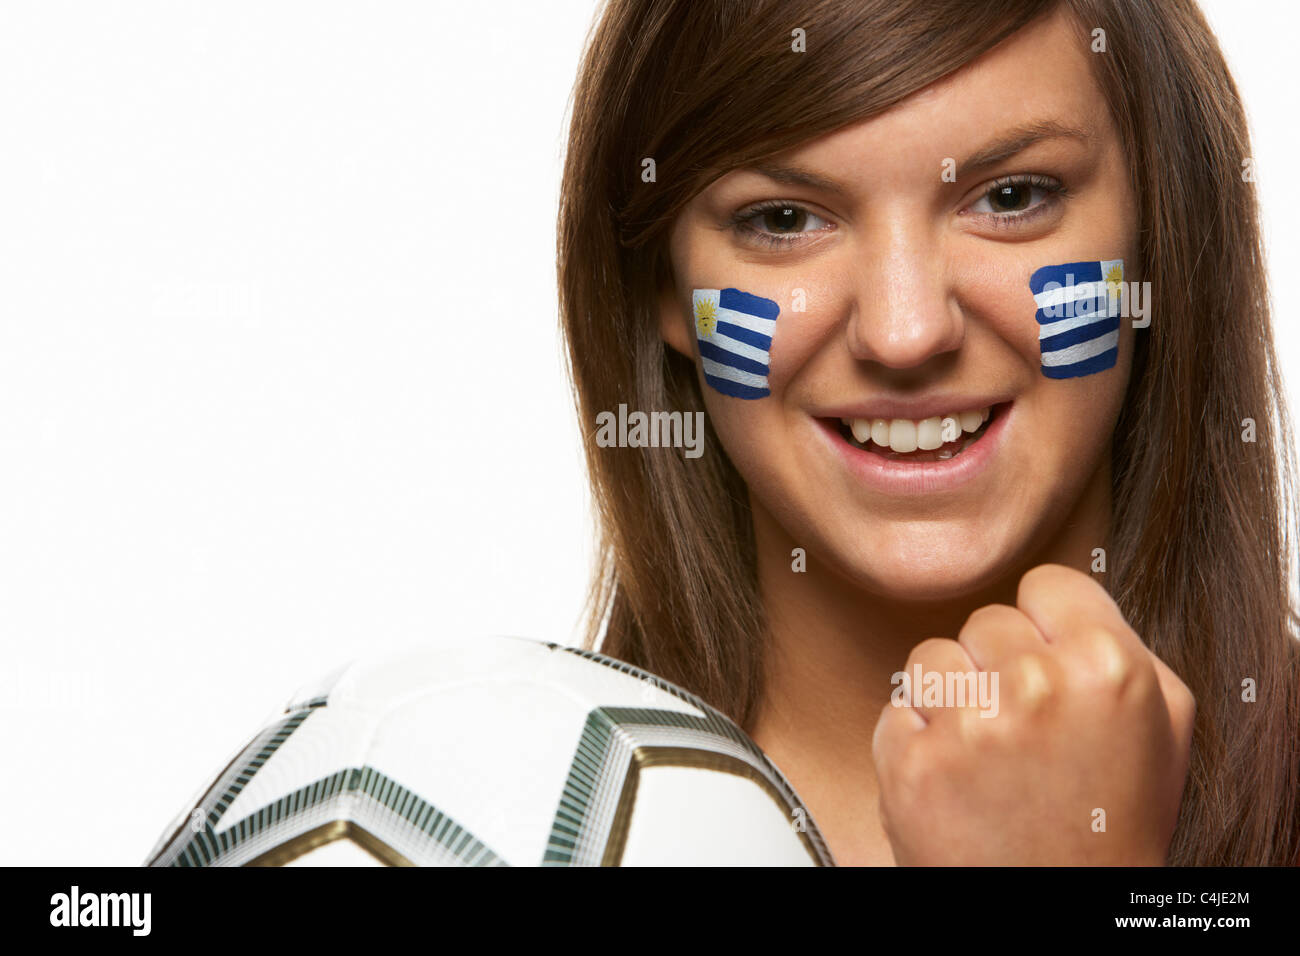 Young Female Football Fan With Uruguayan Flag Painted On Face Stock Photo